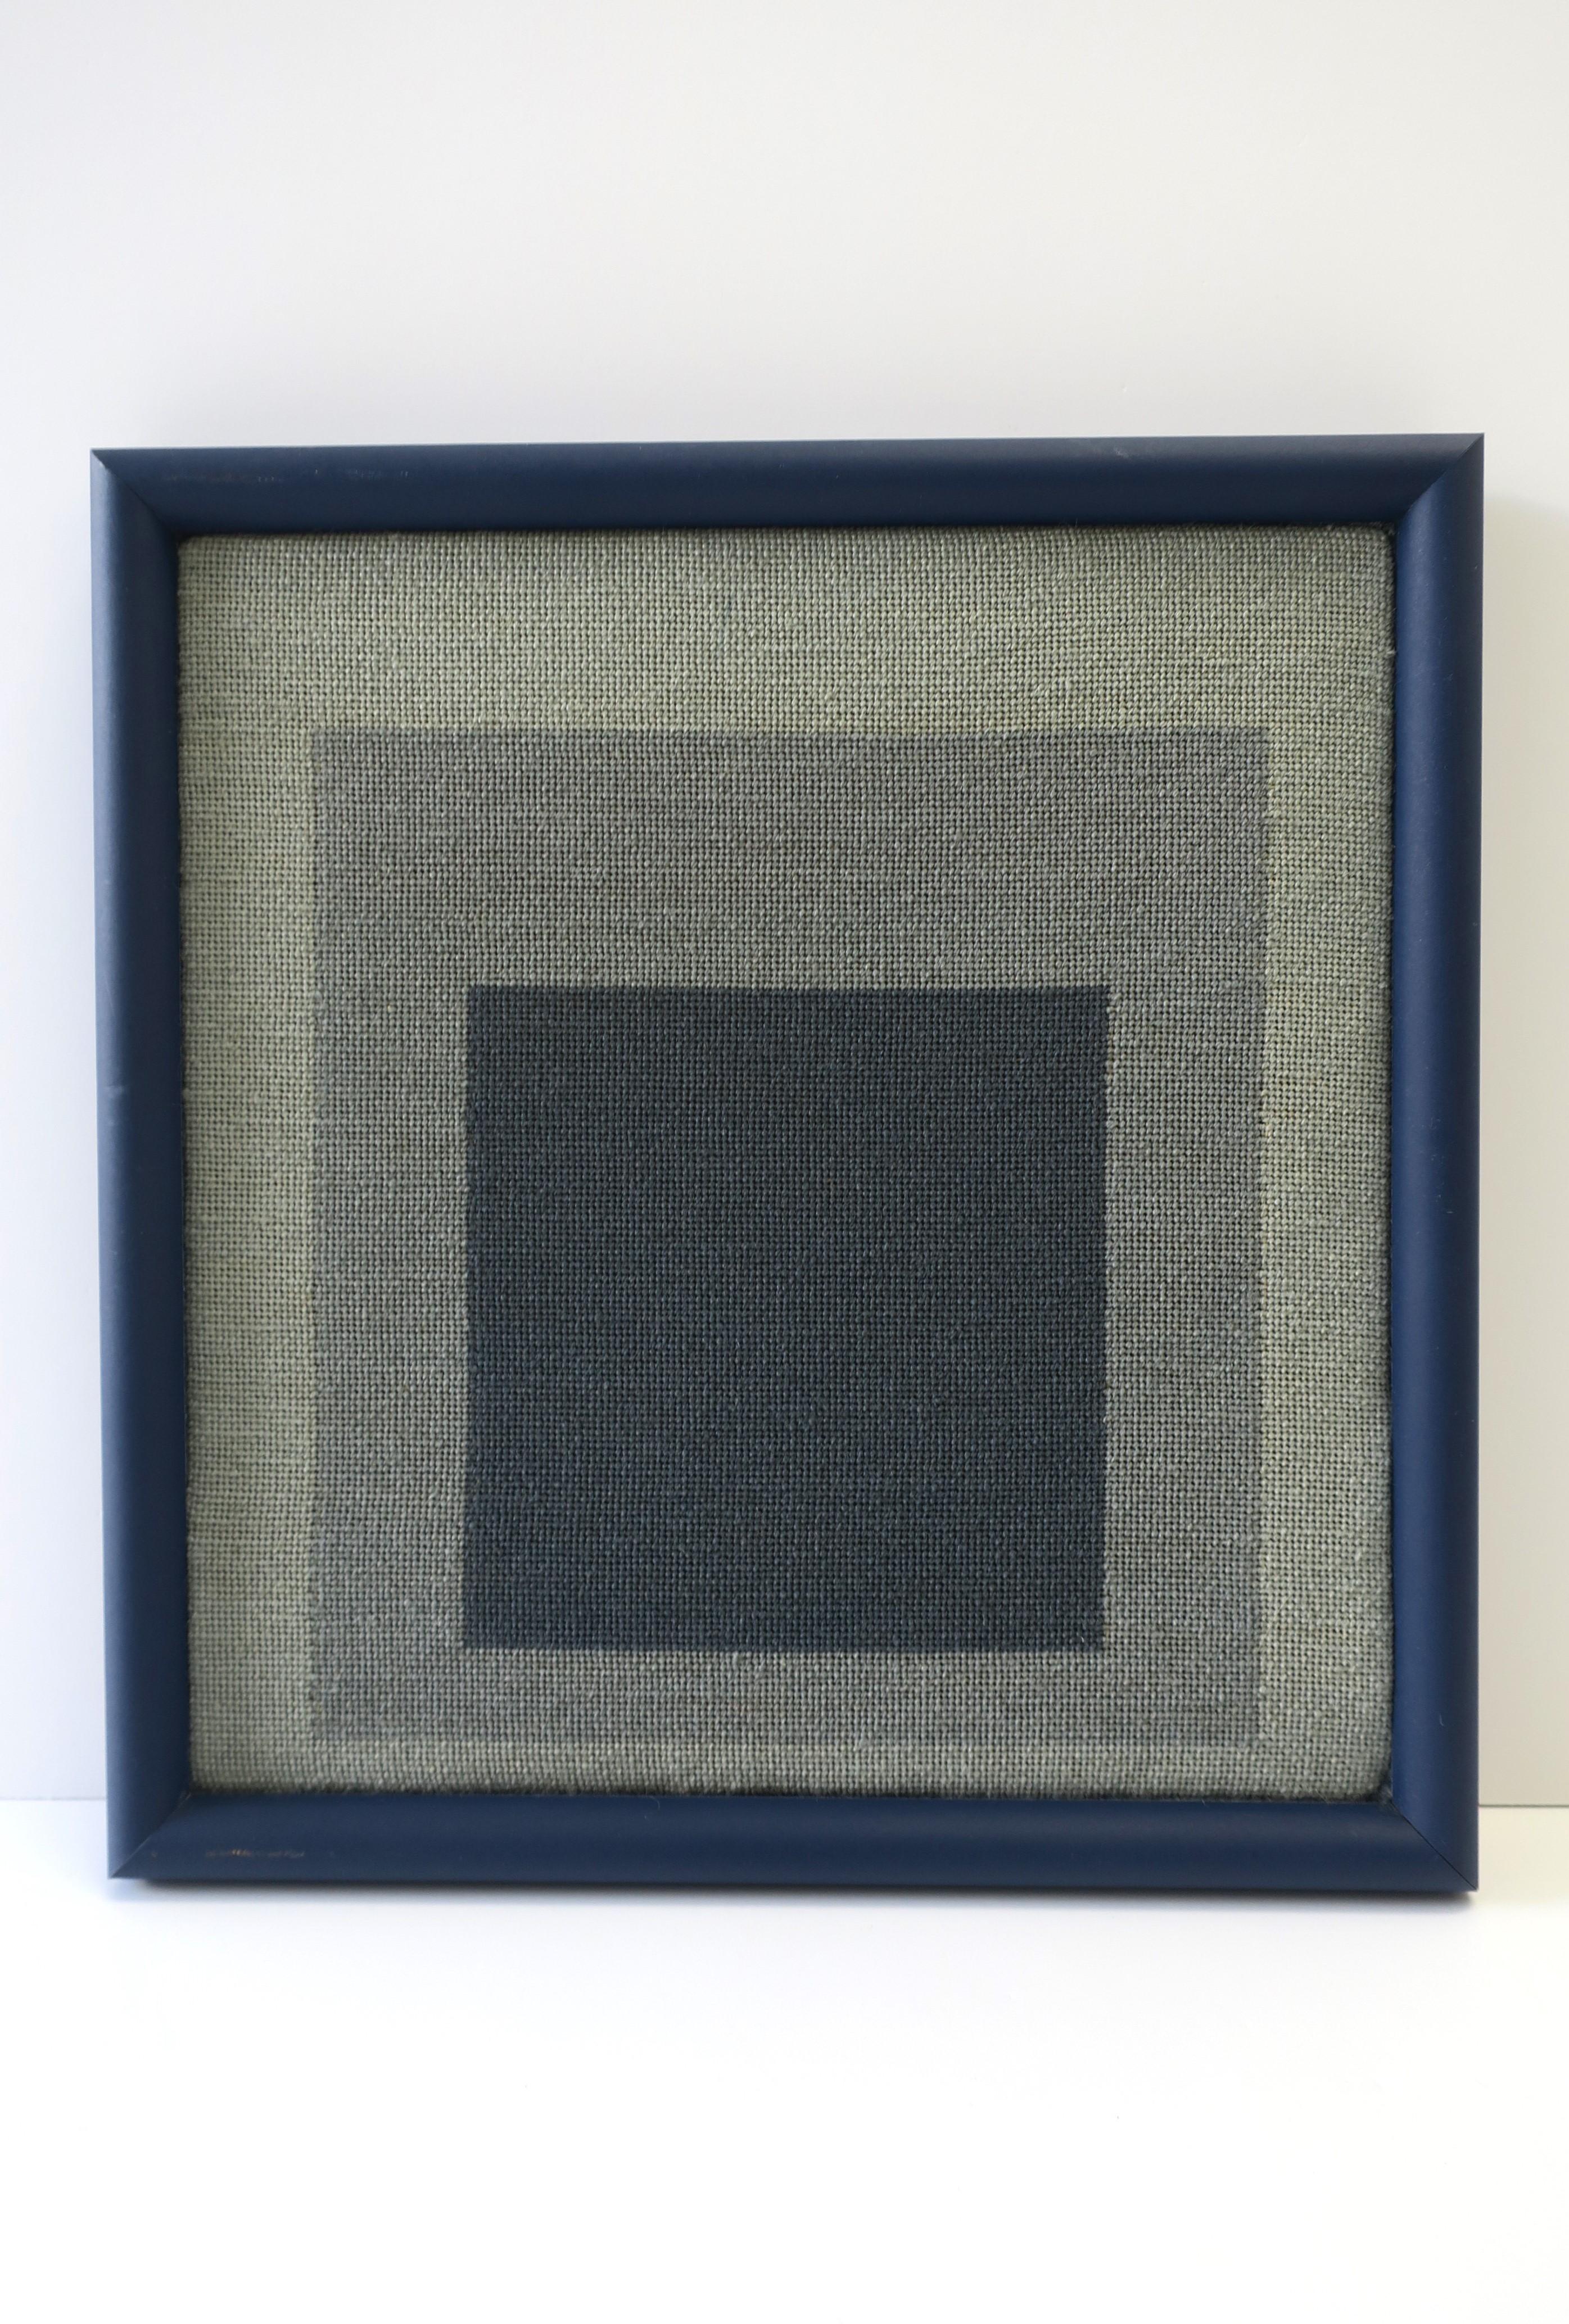 Blue Geometric Needlepoint Artwork Wall Art styled after Josef Albers  In Good Condition For Sale In New York, NY